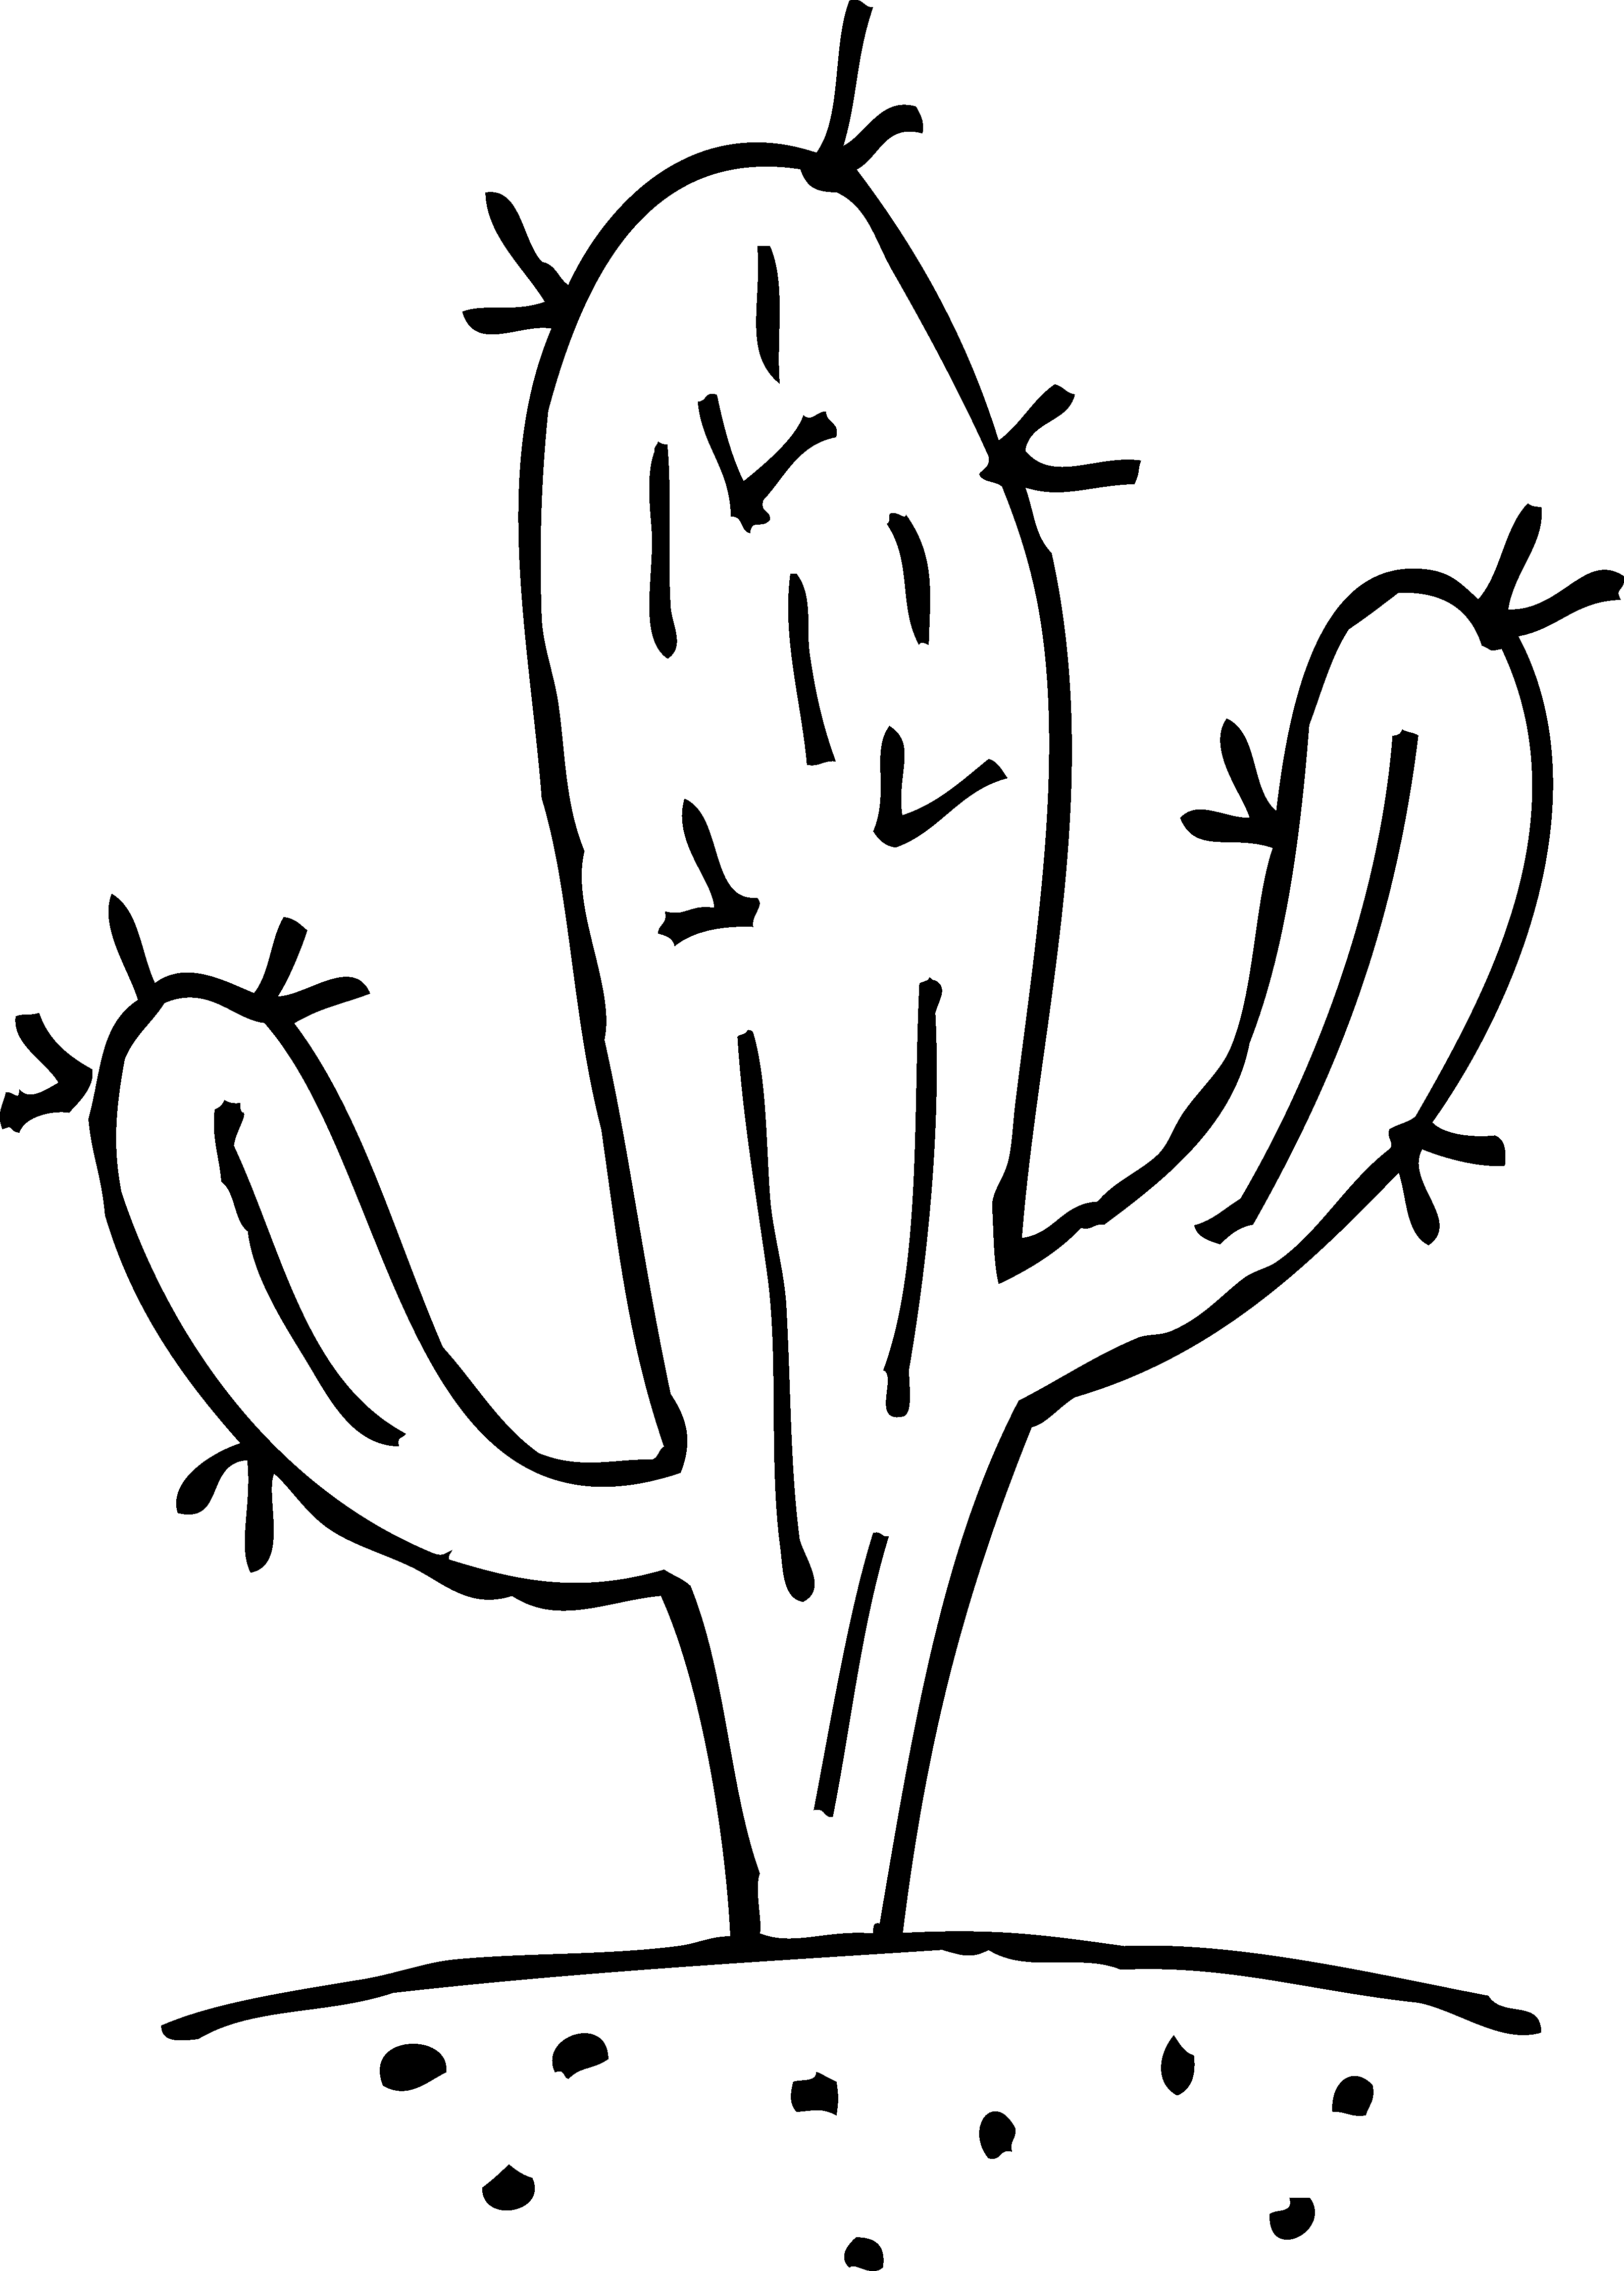 Cactus clip art free vector in open office drawing svg svg ...